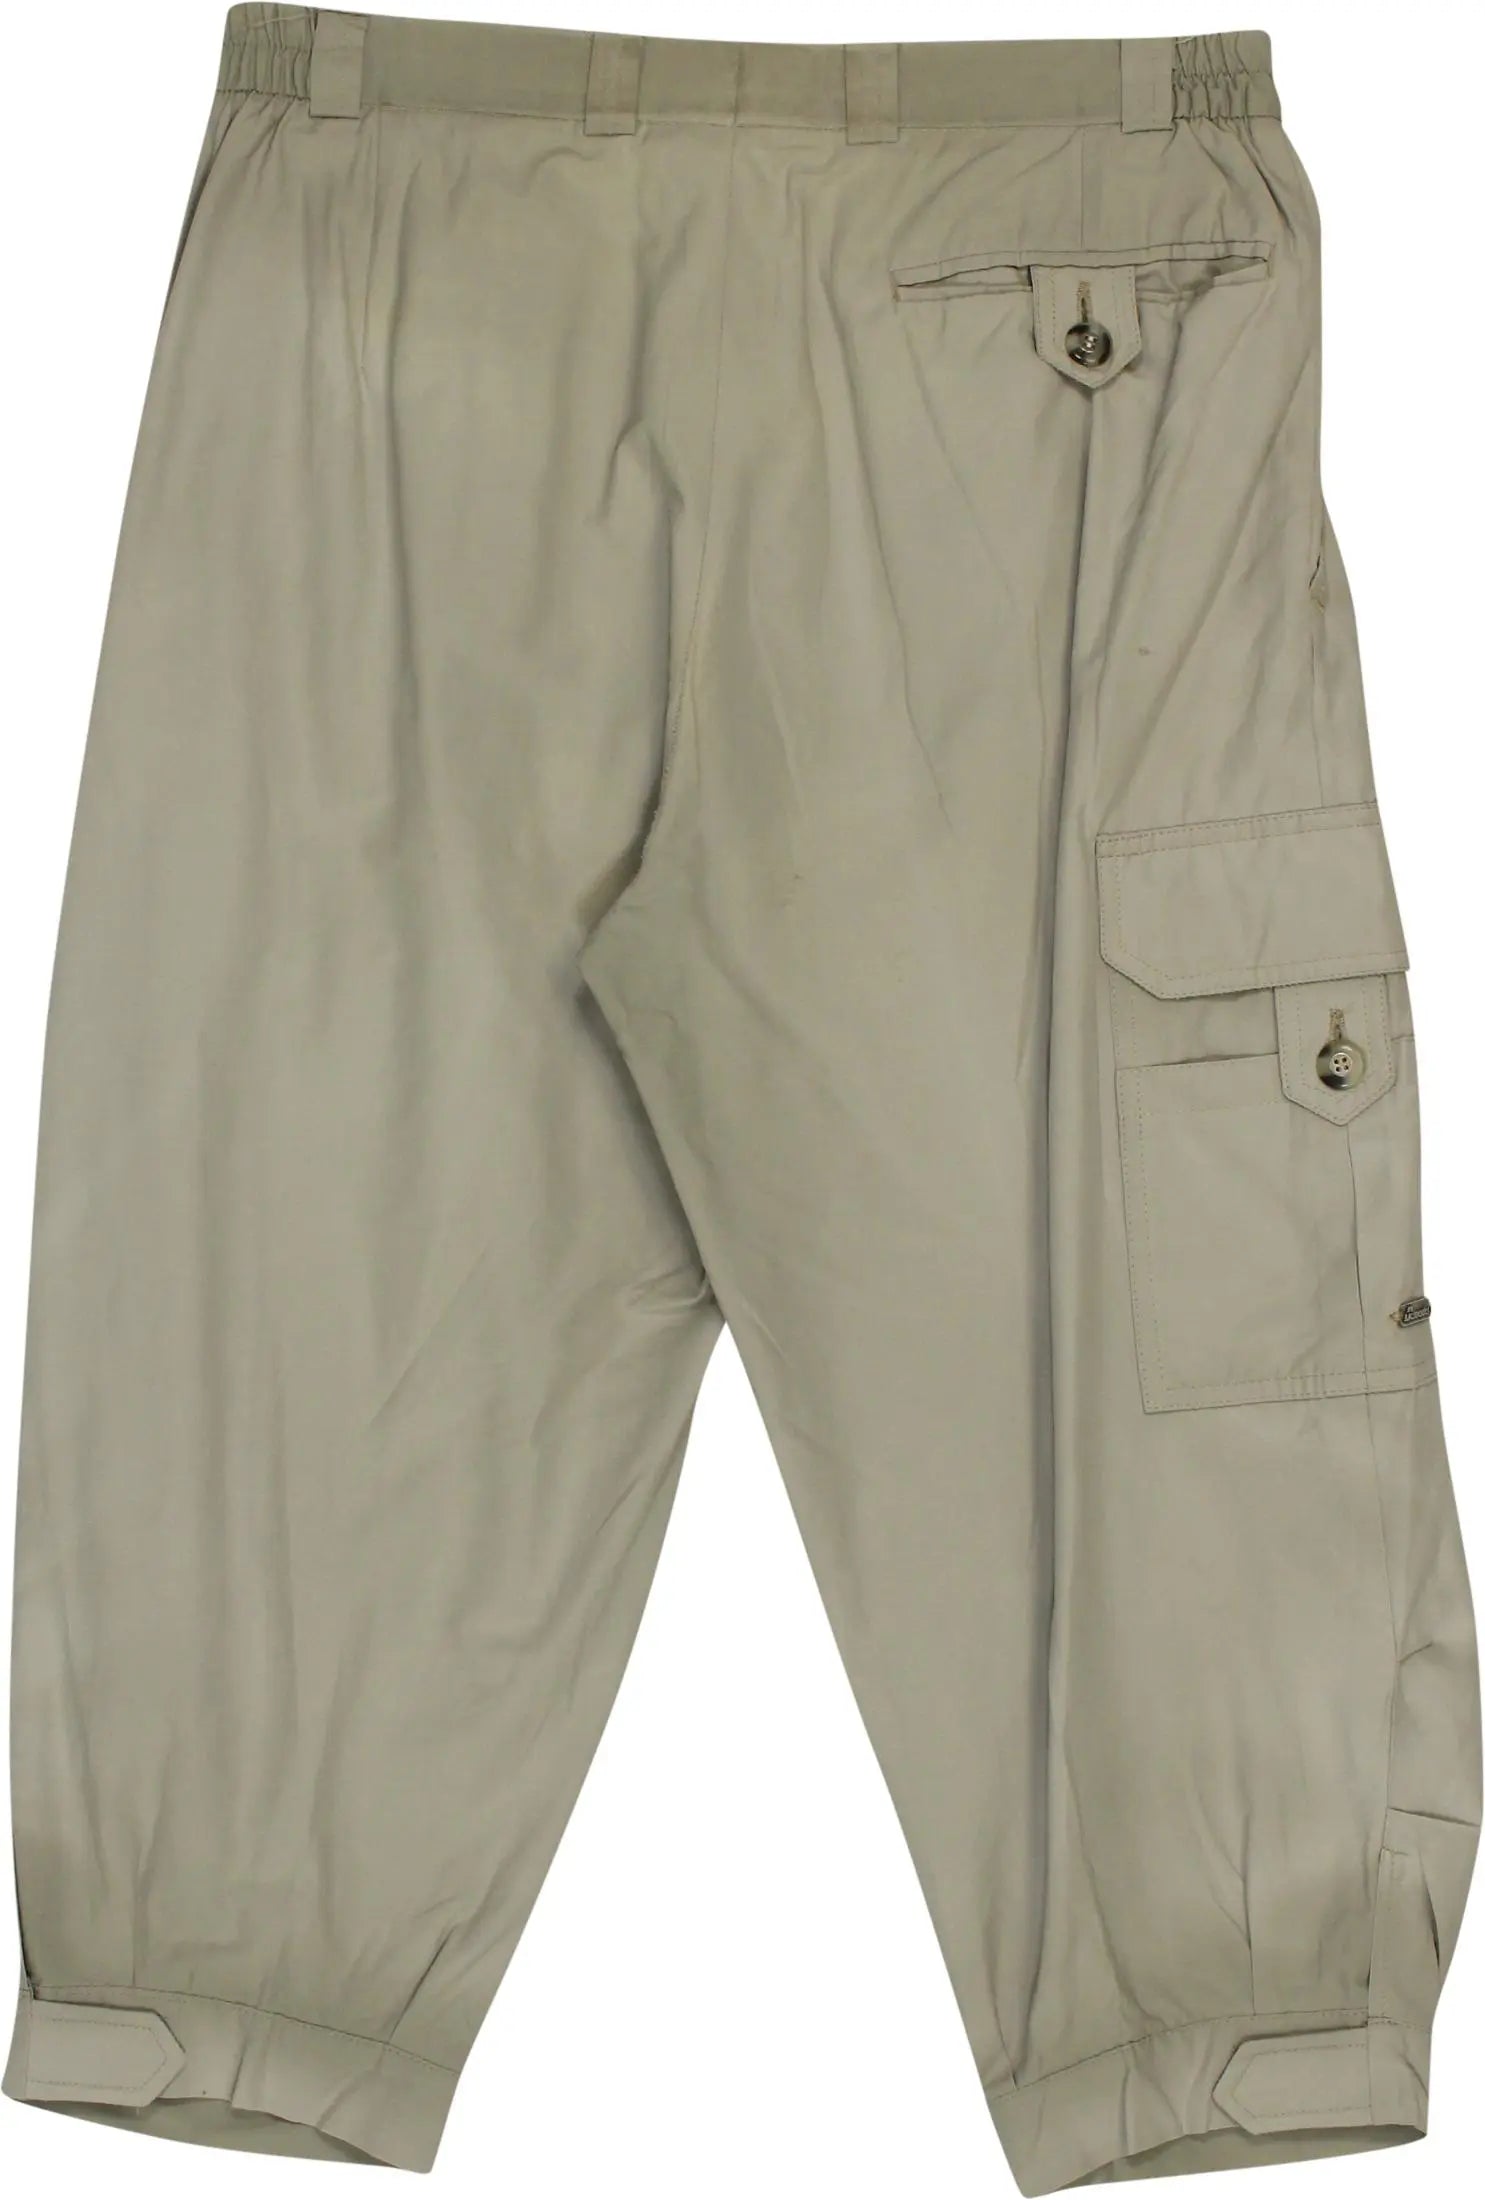 Schmeider Sportswear - Capri Trousers- ThriftTale.com - Vintage and second handclothing